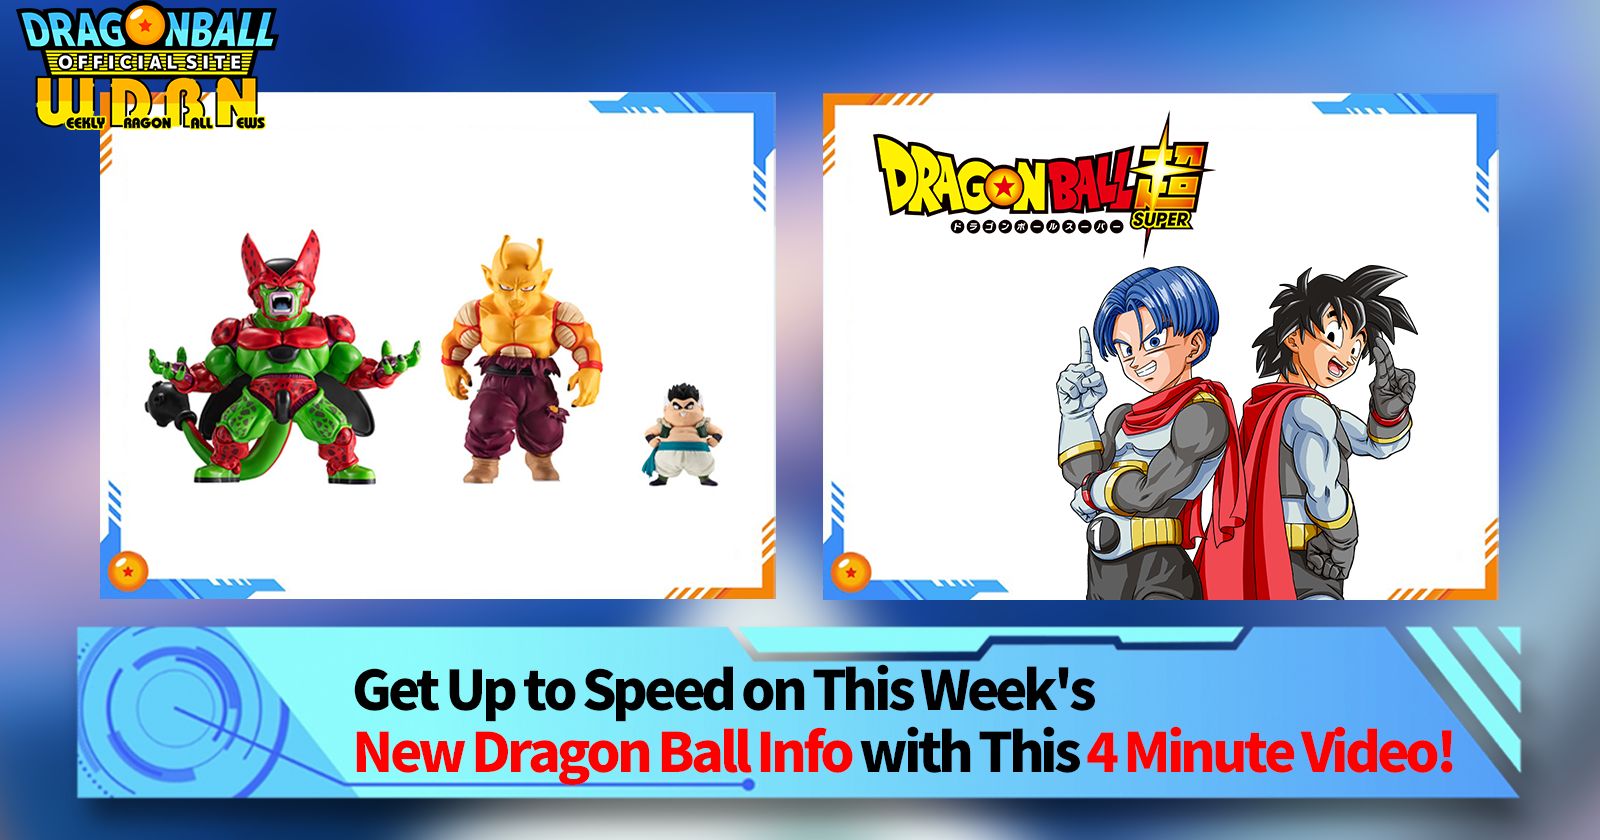 [December 19th] Weekly Dragon Ball News Broadcast!